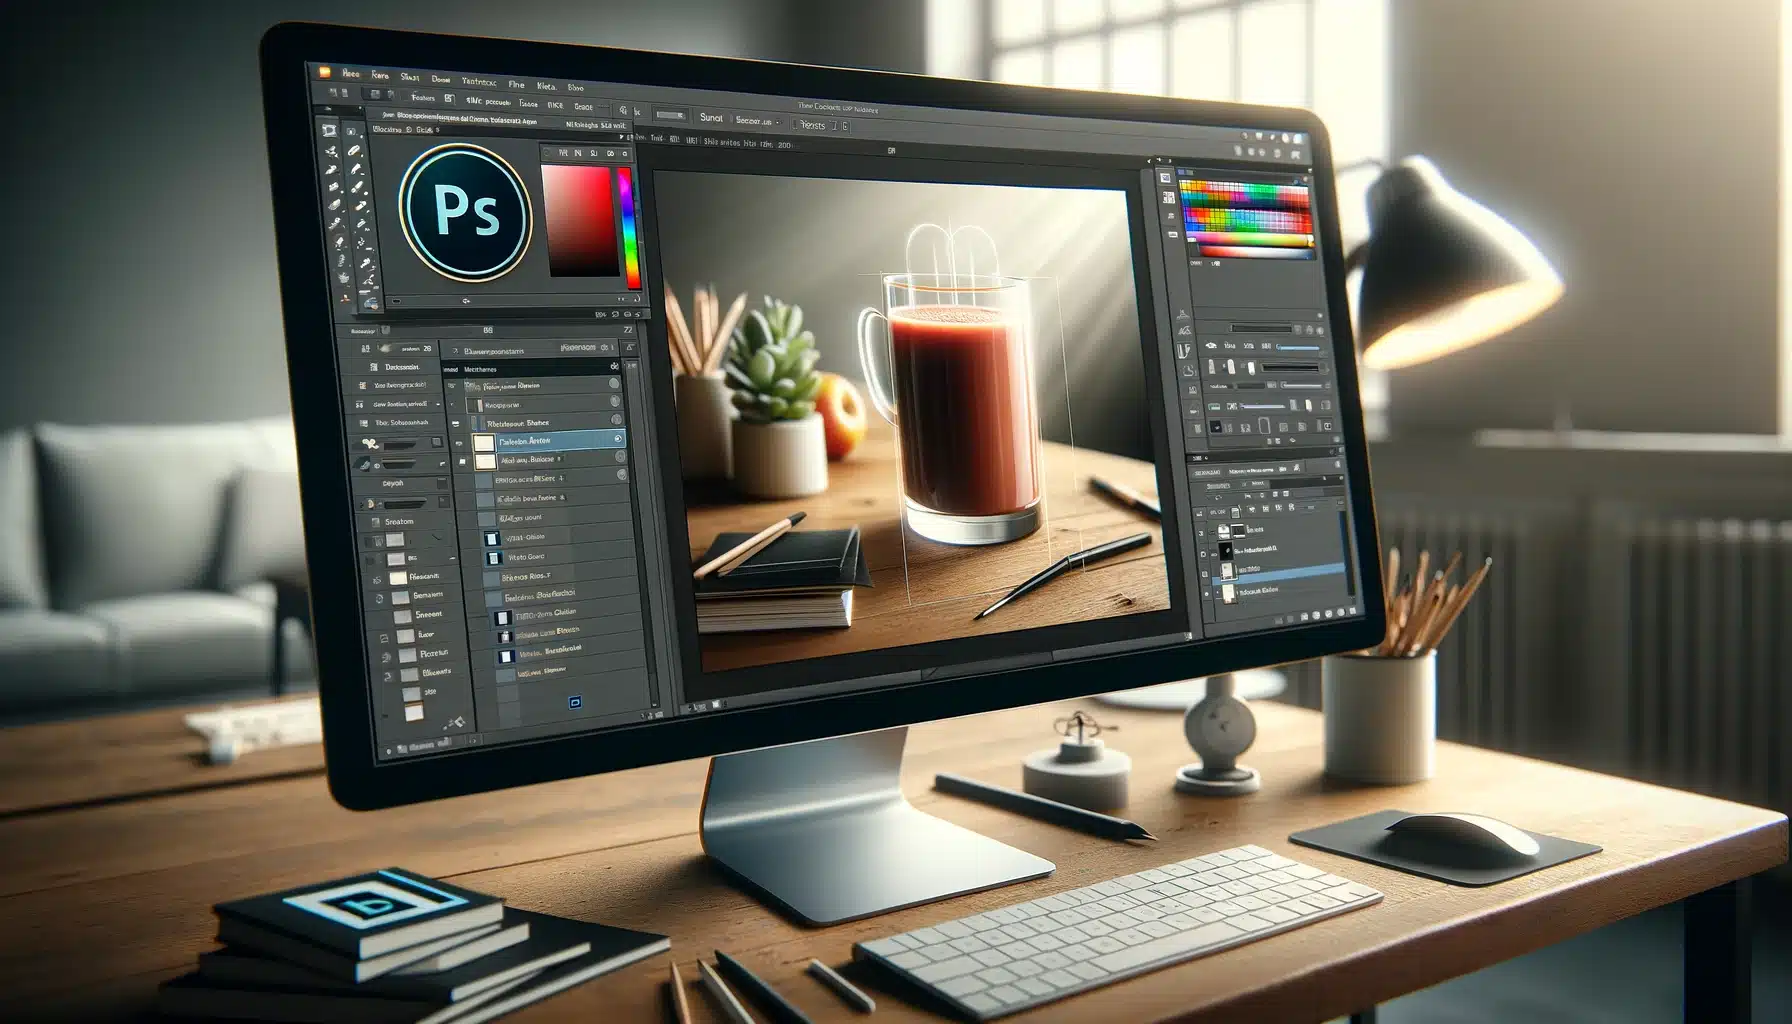 Photoshop interface showing an image of a product with the background blurred using the Tilt-Shift Blur tool